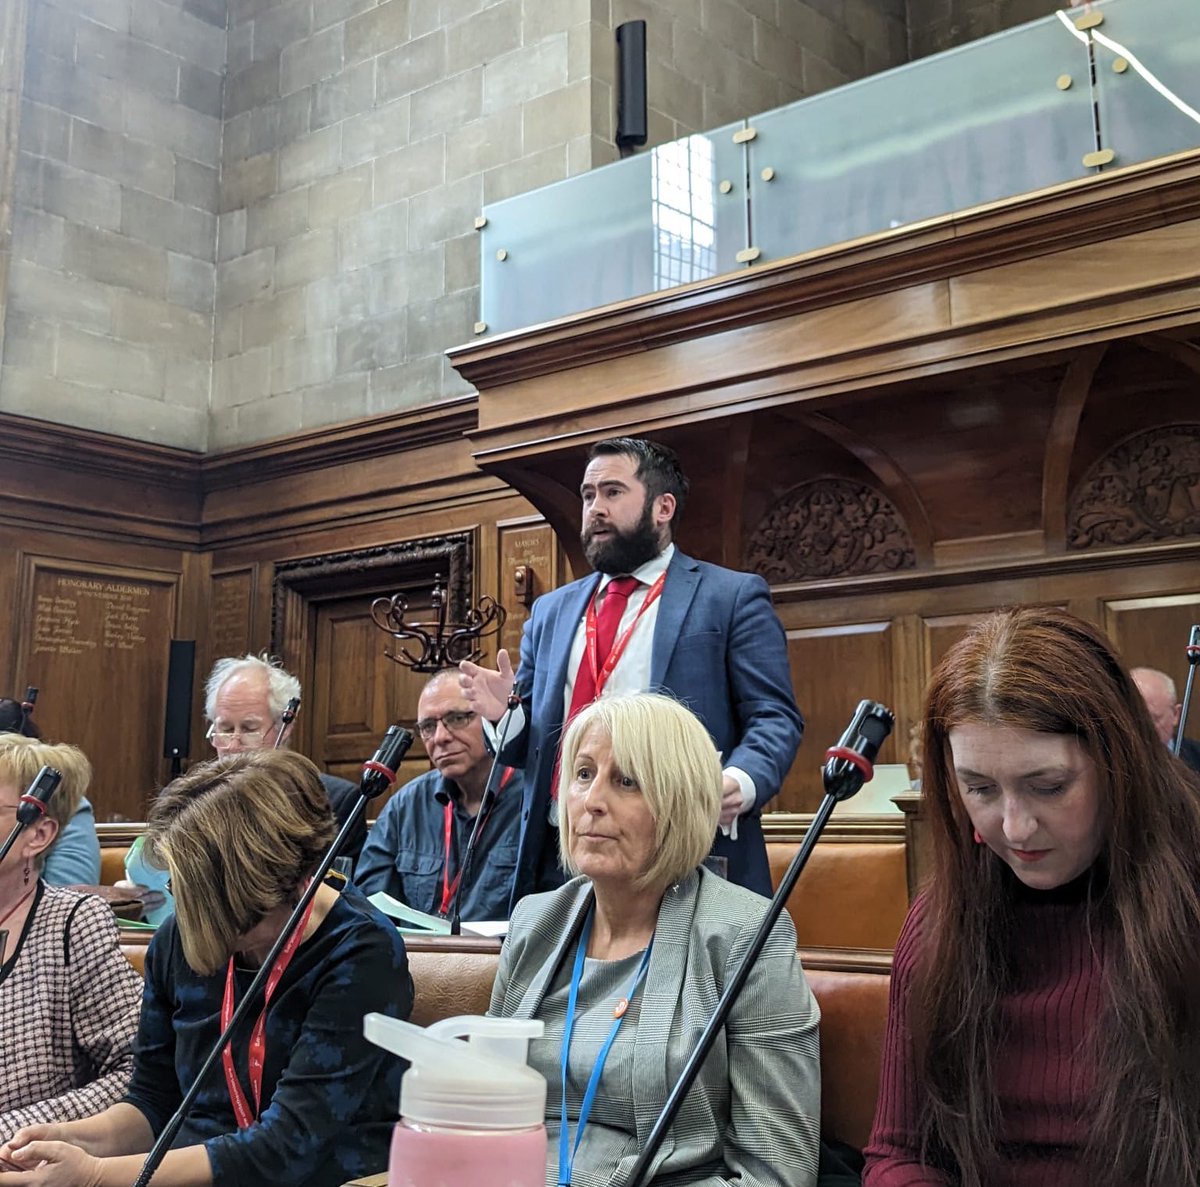 This afternoon I spoke at full council about work taking place in Leeds to tackle problem gambling and efforts to reduce gambling harms in our city. Special mention was given to @GamCare and @LeedsCGS and their incredible work.

#GamblingHarms #gambleaware